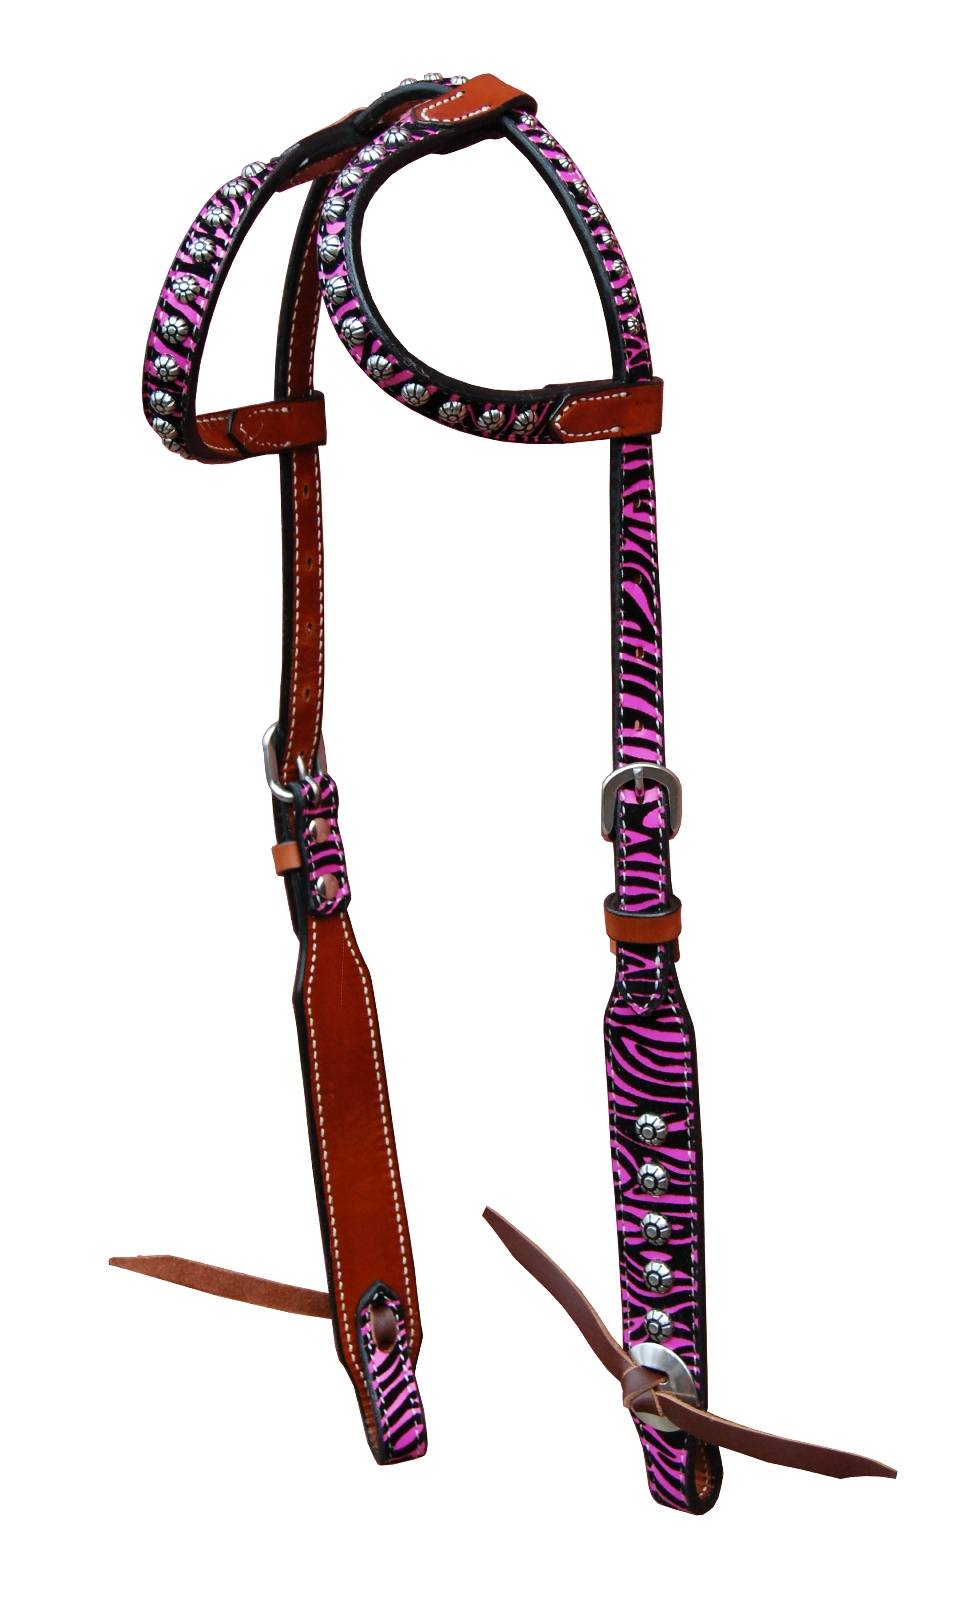 468858PINK HRSE Turn-Two Double Ear Headstall - Chasing Wild sku 468858PINK HRSE